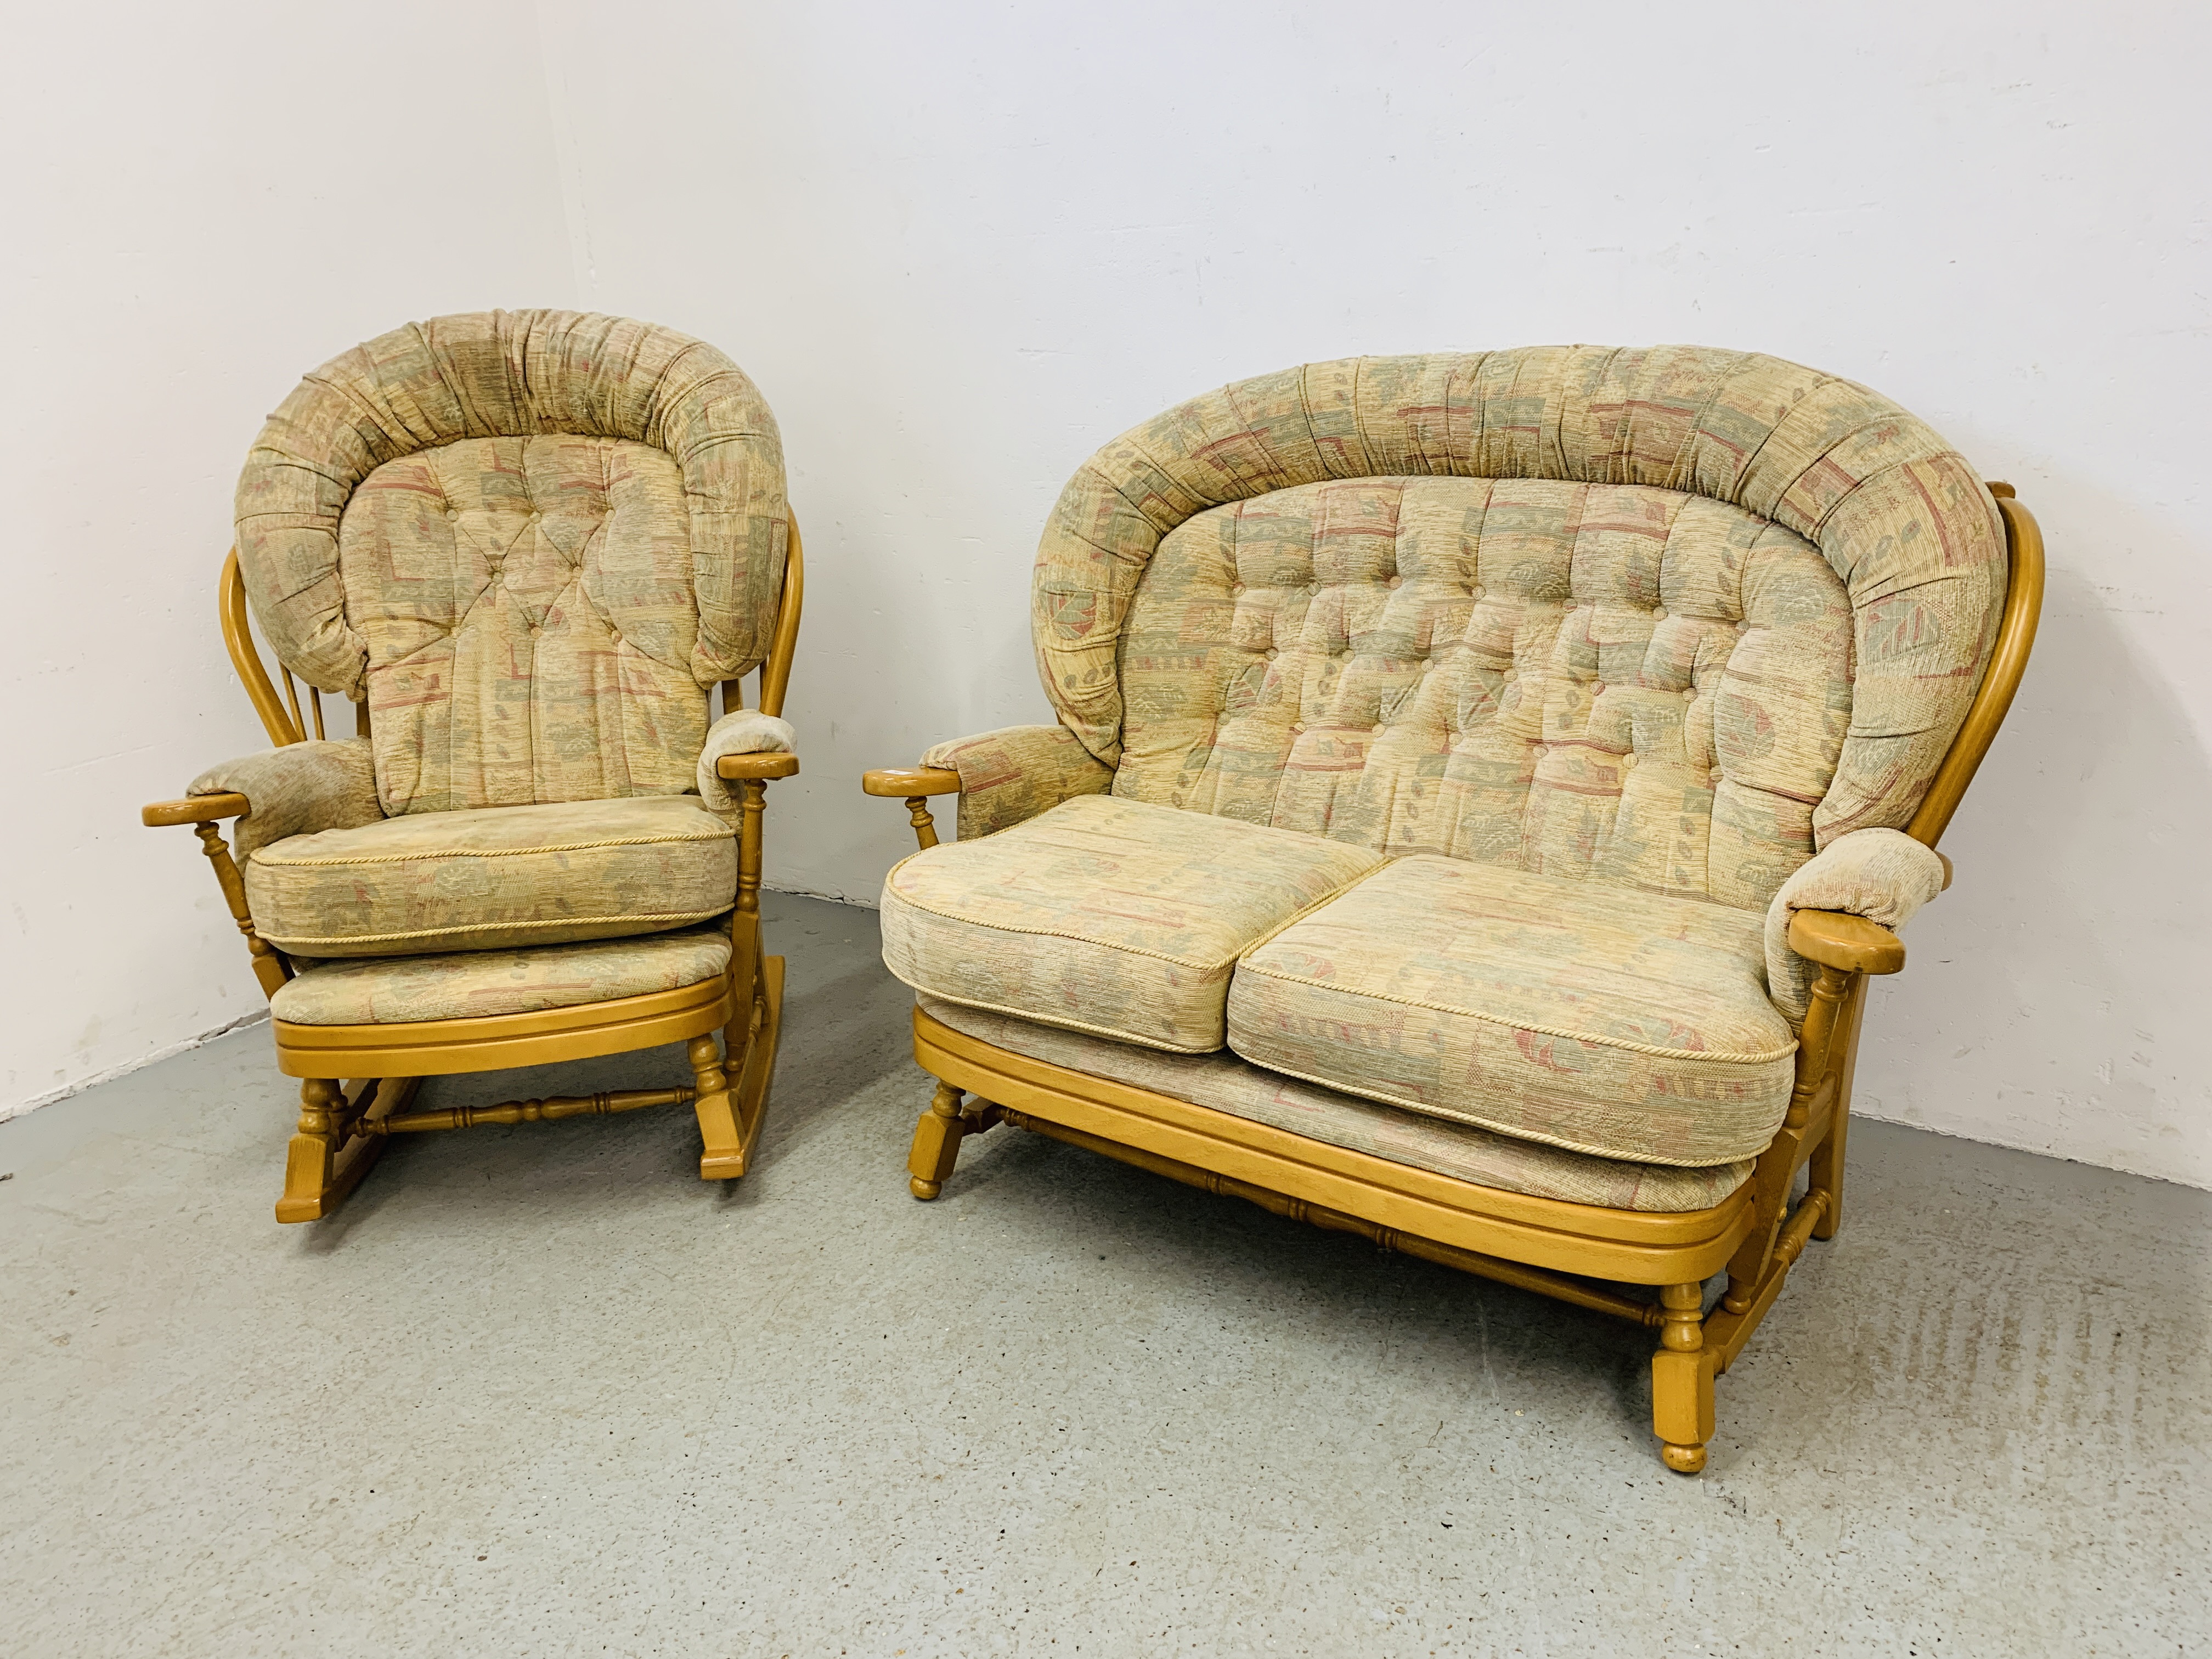 AN ERCOL STYLE COTTAGE SUITE WITH BEECH WOOD FRAME COMPRISING OF 2 SEATER SOFA AND ROCKING CHAIR